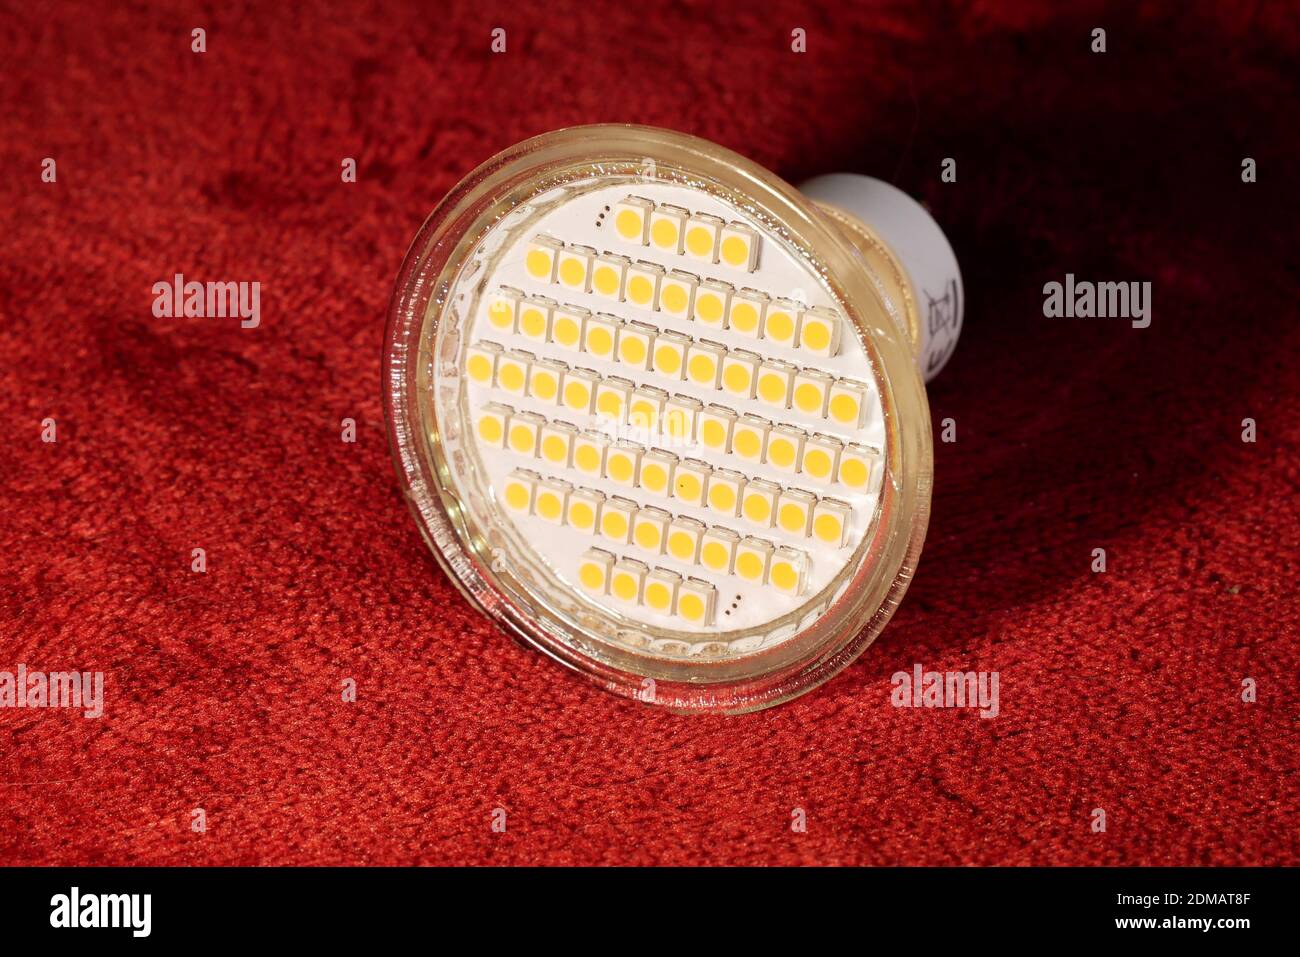 Close-up of a lamp bulb made of yellow SMD LEDs Stock Photo